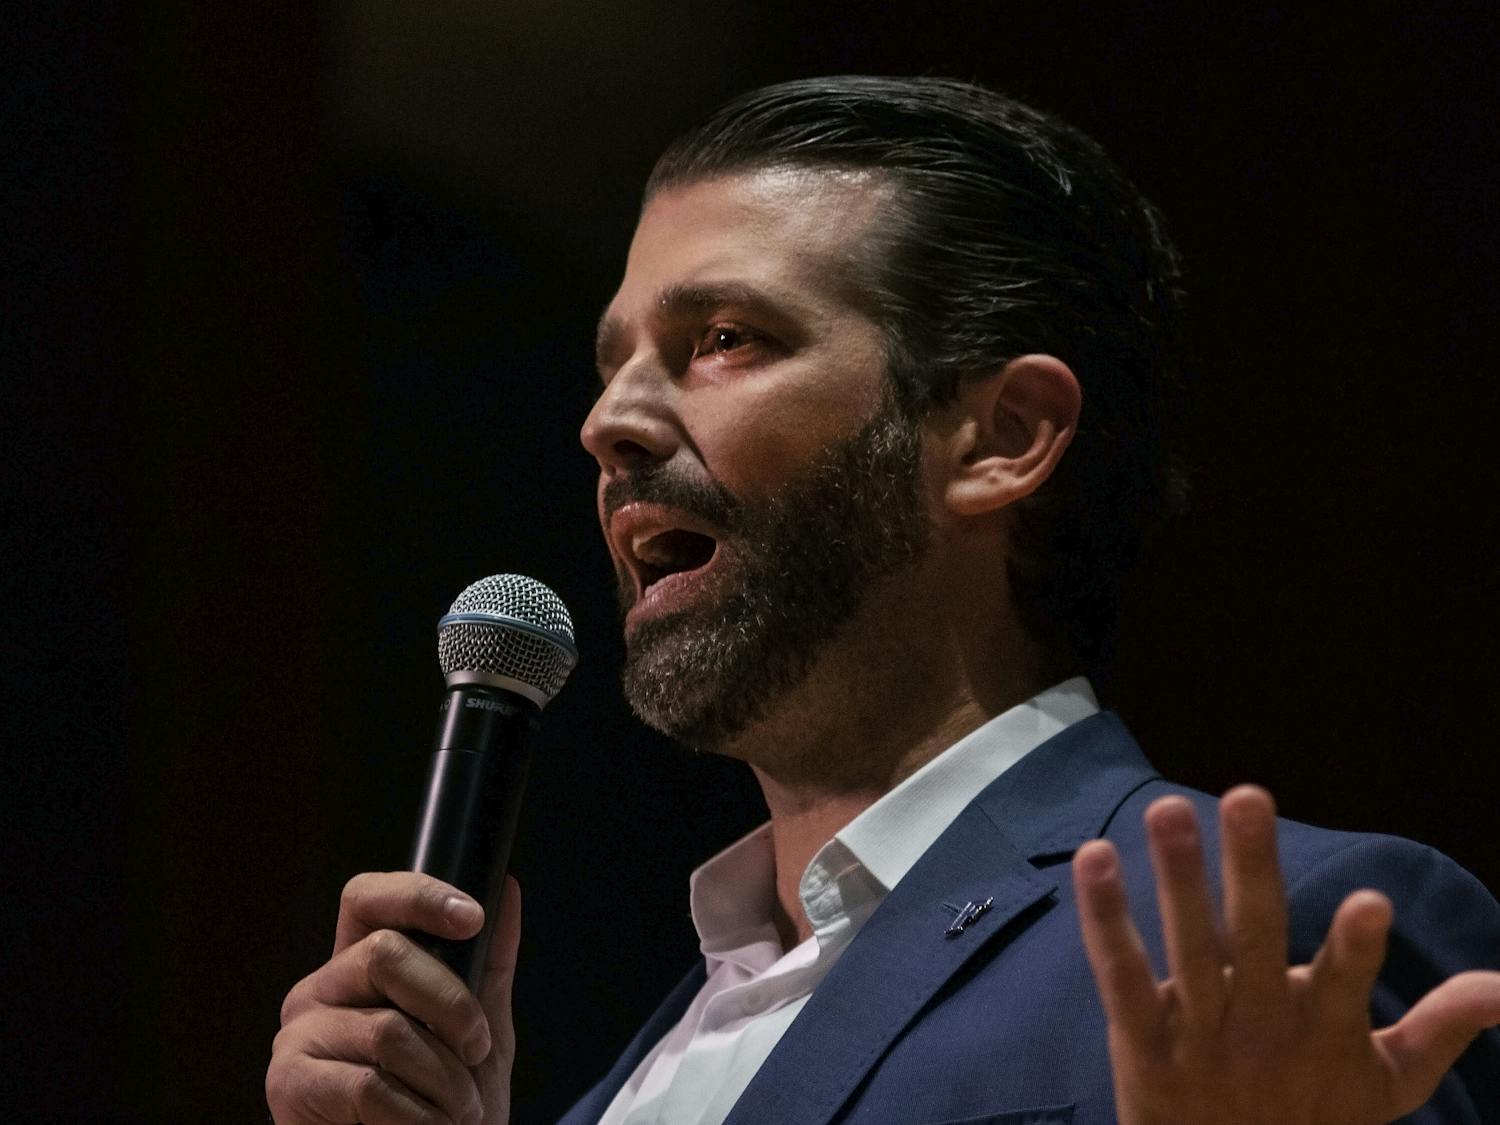 Donald Trump Jr. speaks to a crowd of more than 800 people Thursday evening. Trump’s speech was met with a mixture of cheers and boos.